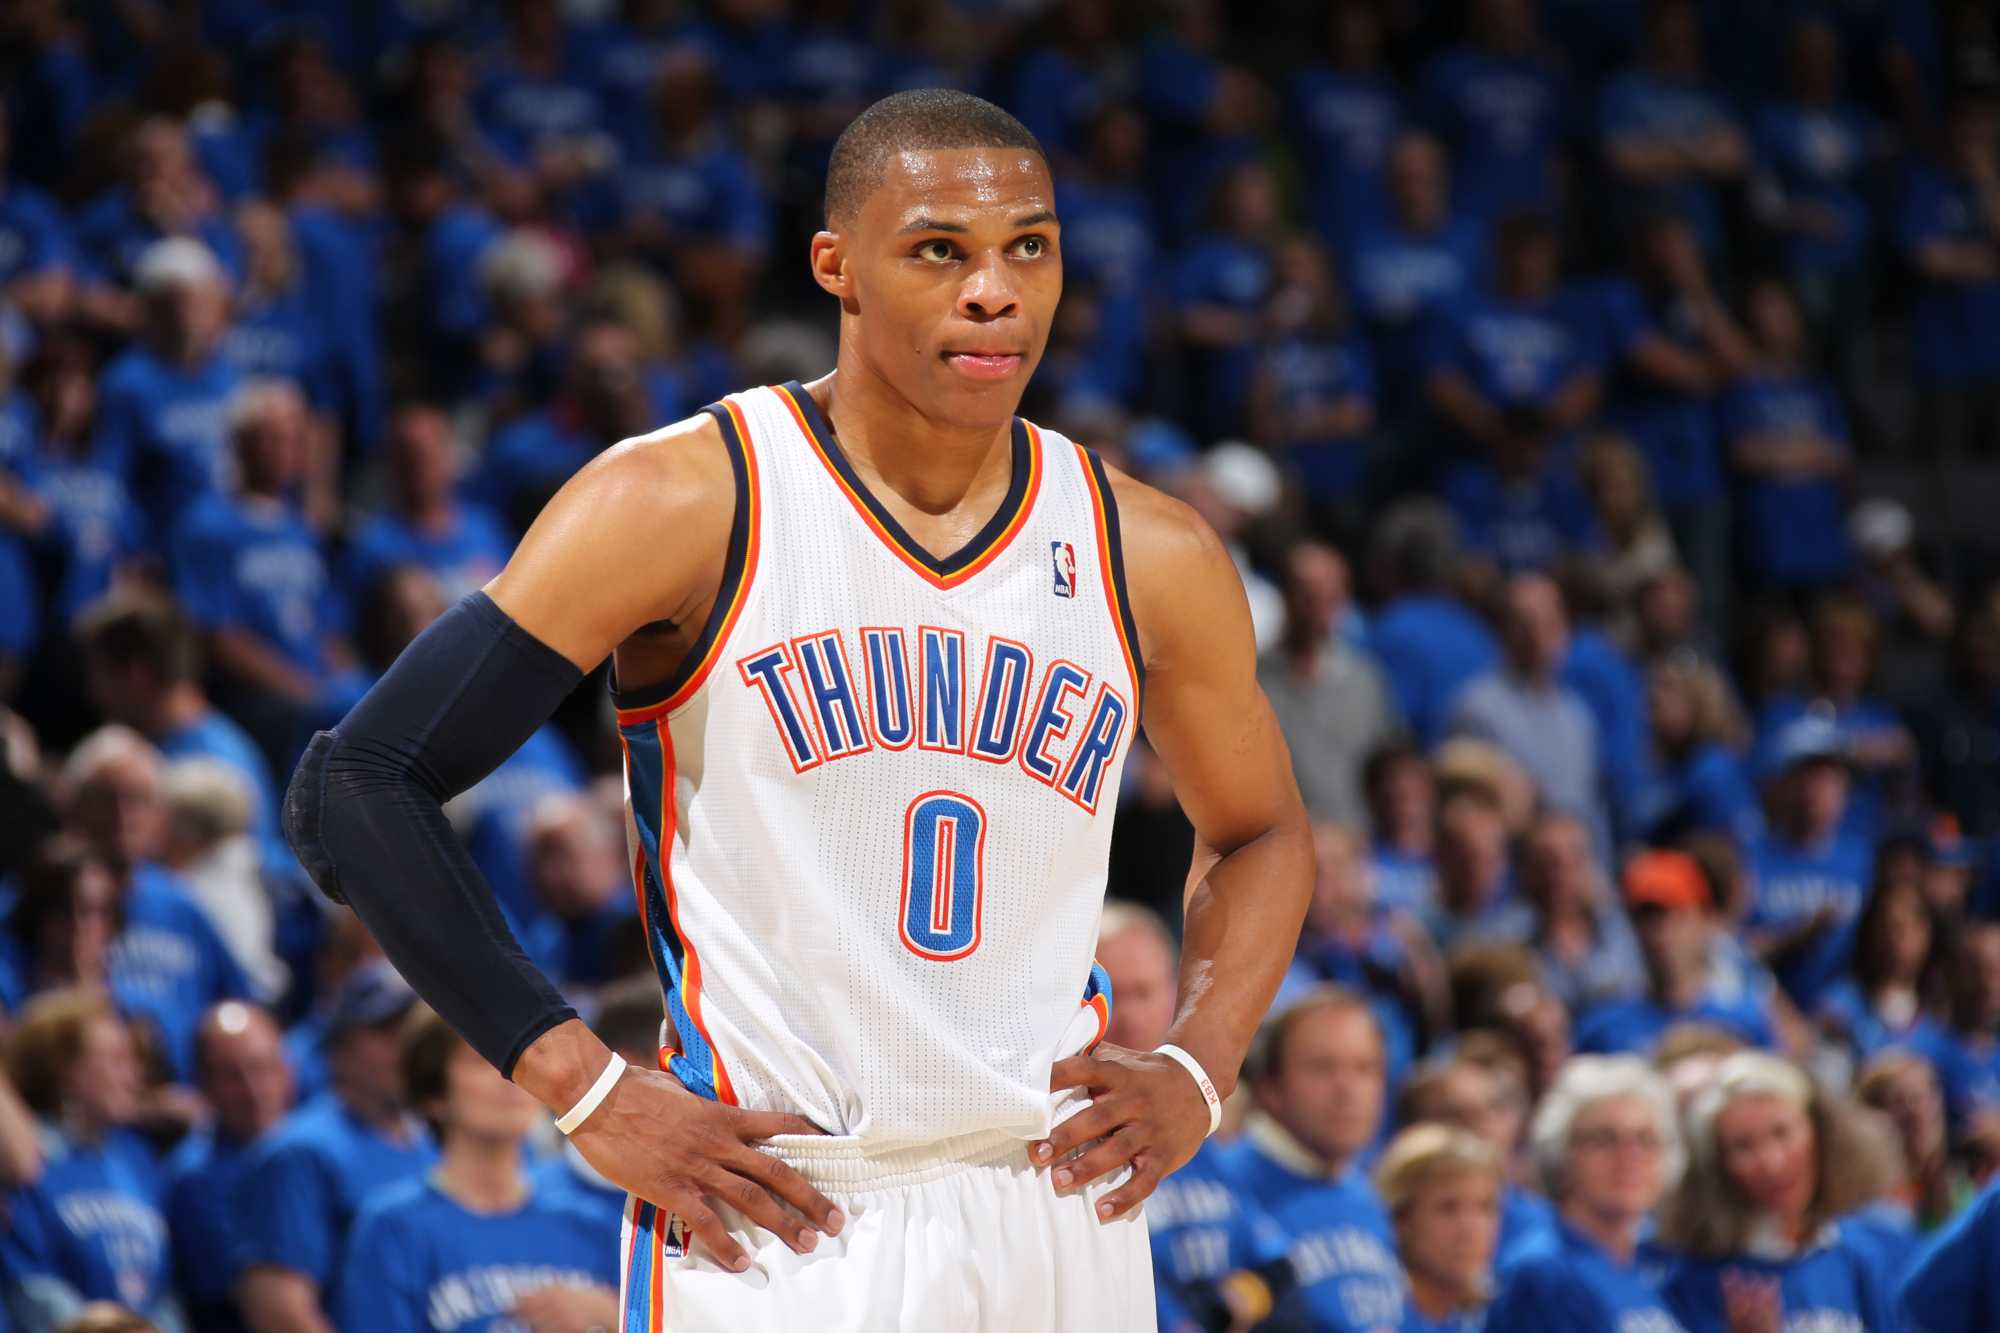 Russell Westbrook Talks About the Scoring Title After Thunder Miss Playoffs